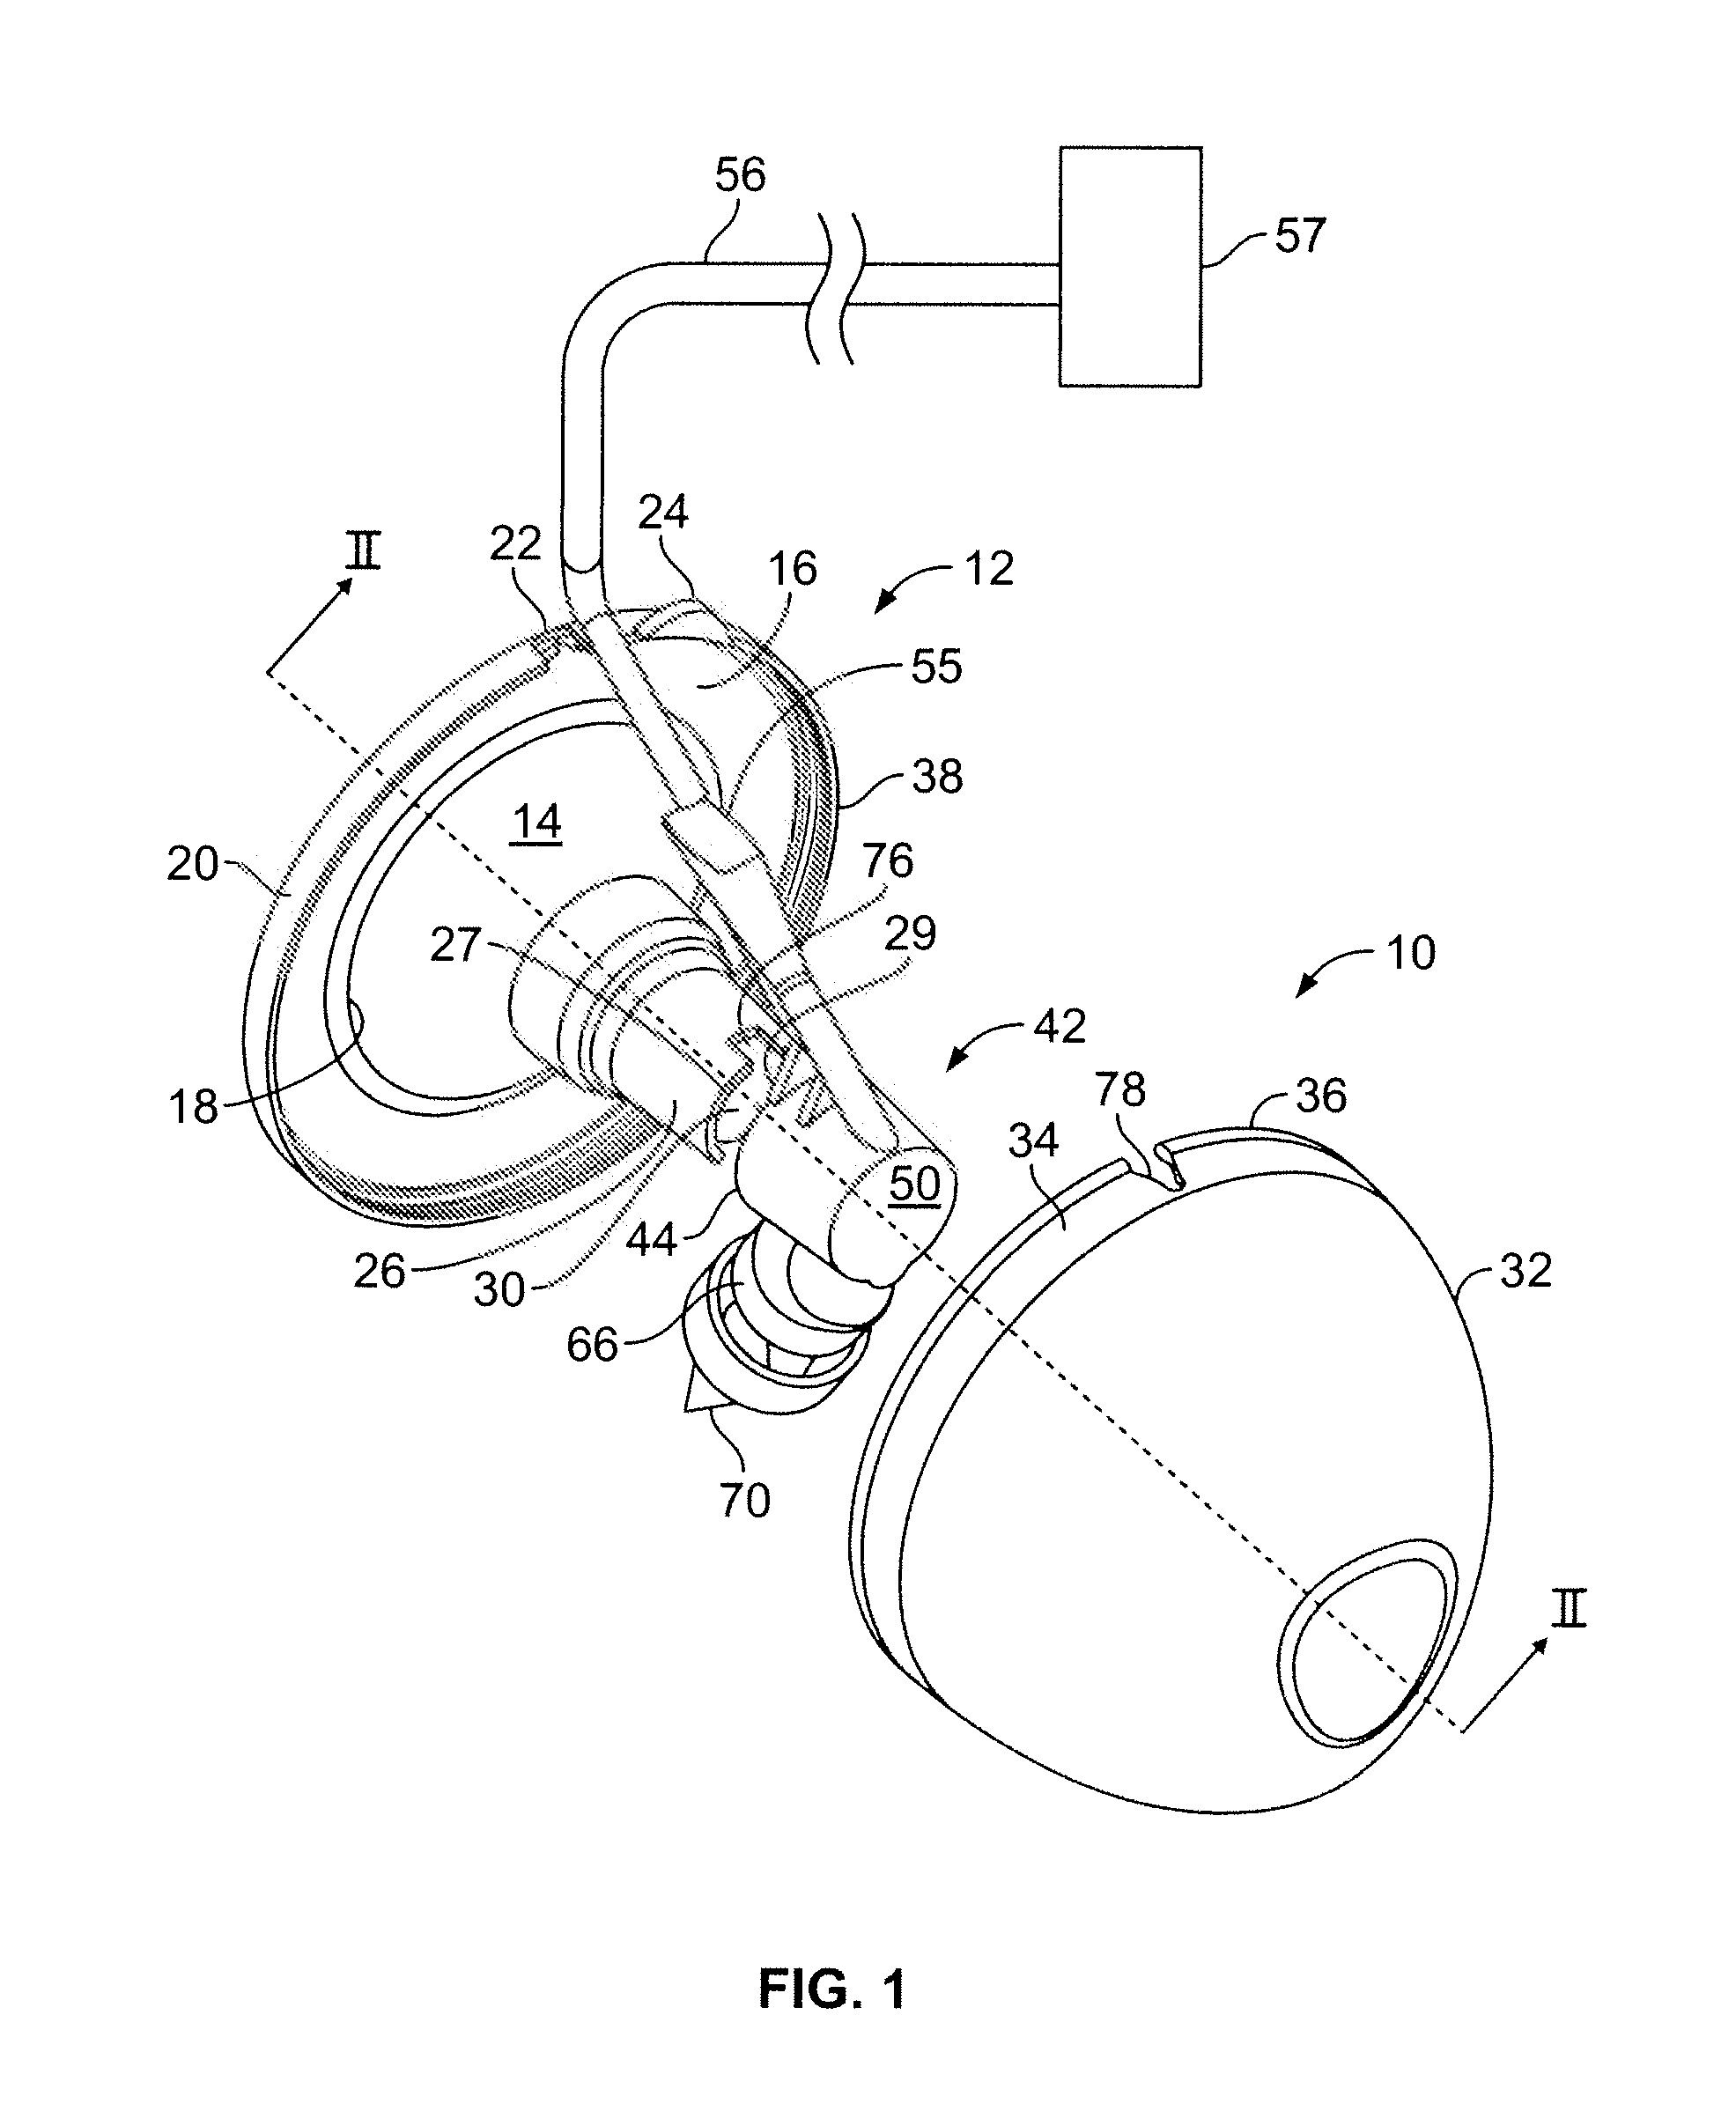 Submersible valve for a breast milk collection device with self contained reservoir